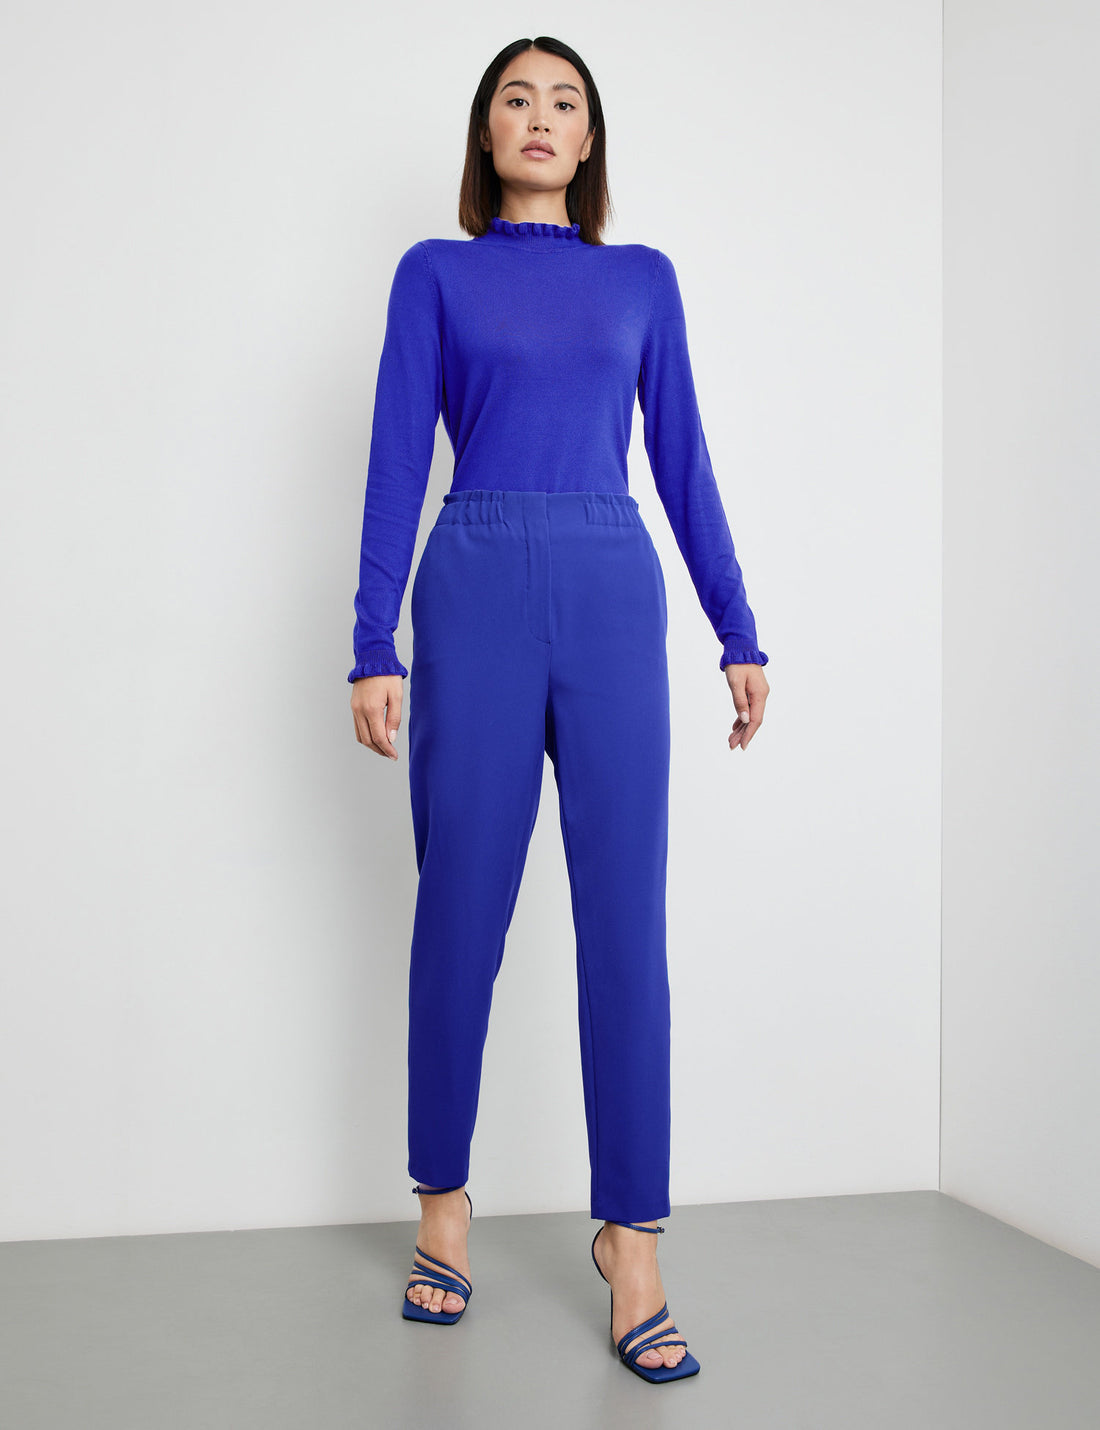 Flowing 7/8-Length Trousers In A Slim Fit_420430-11355_8790_01